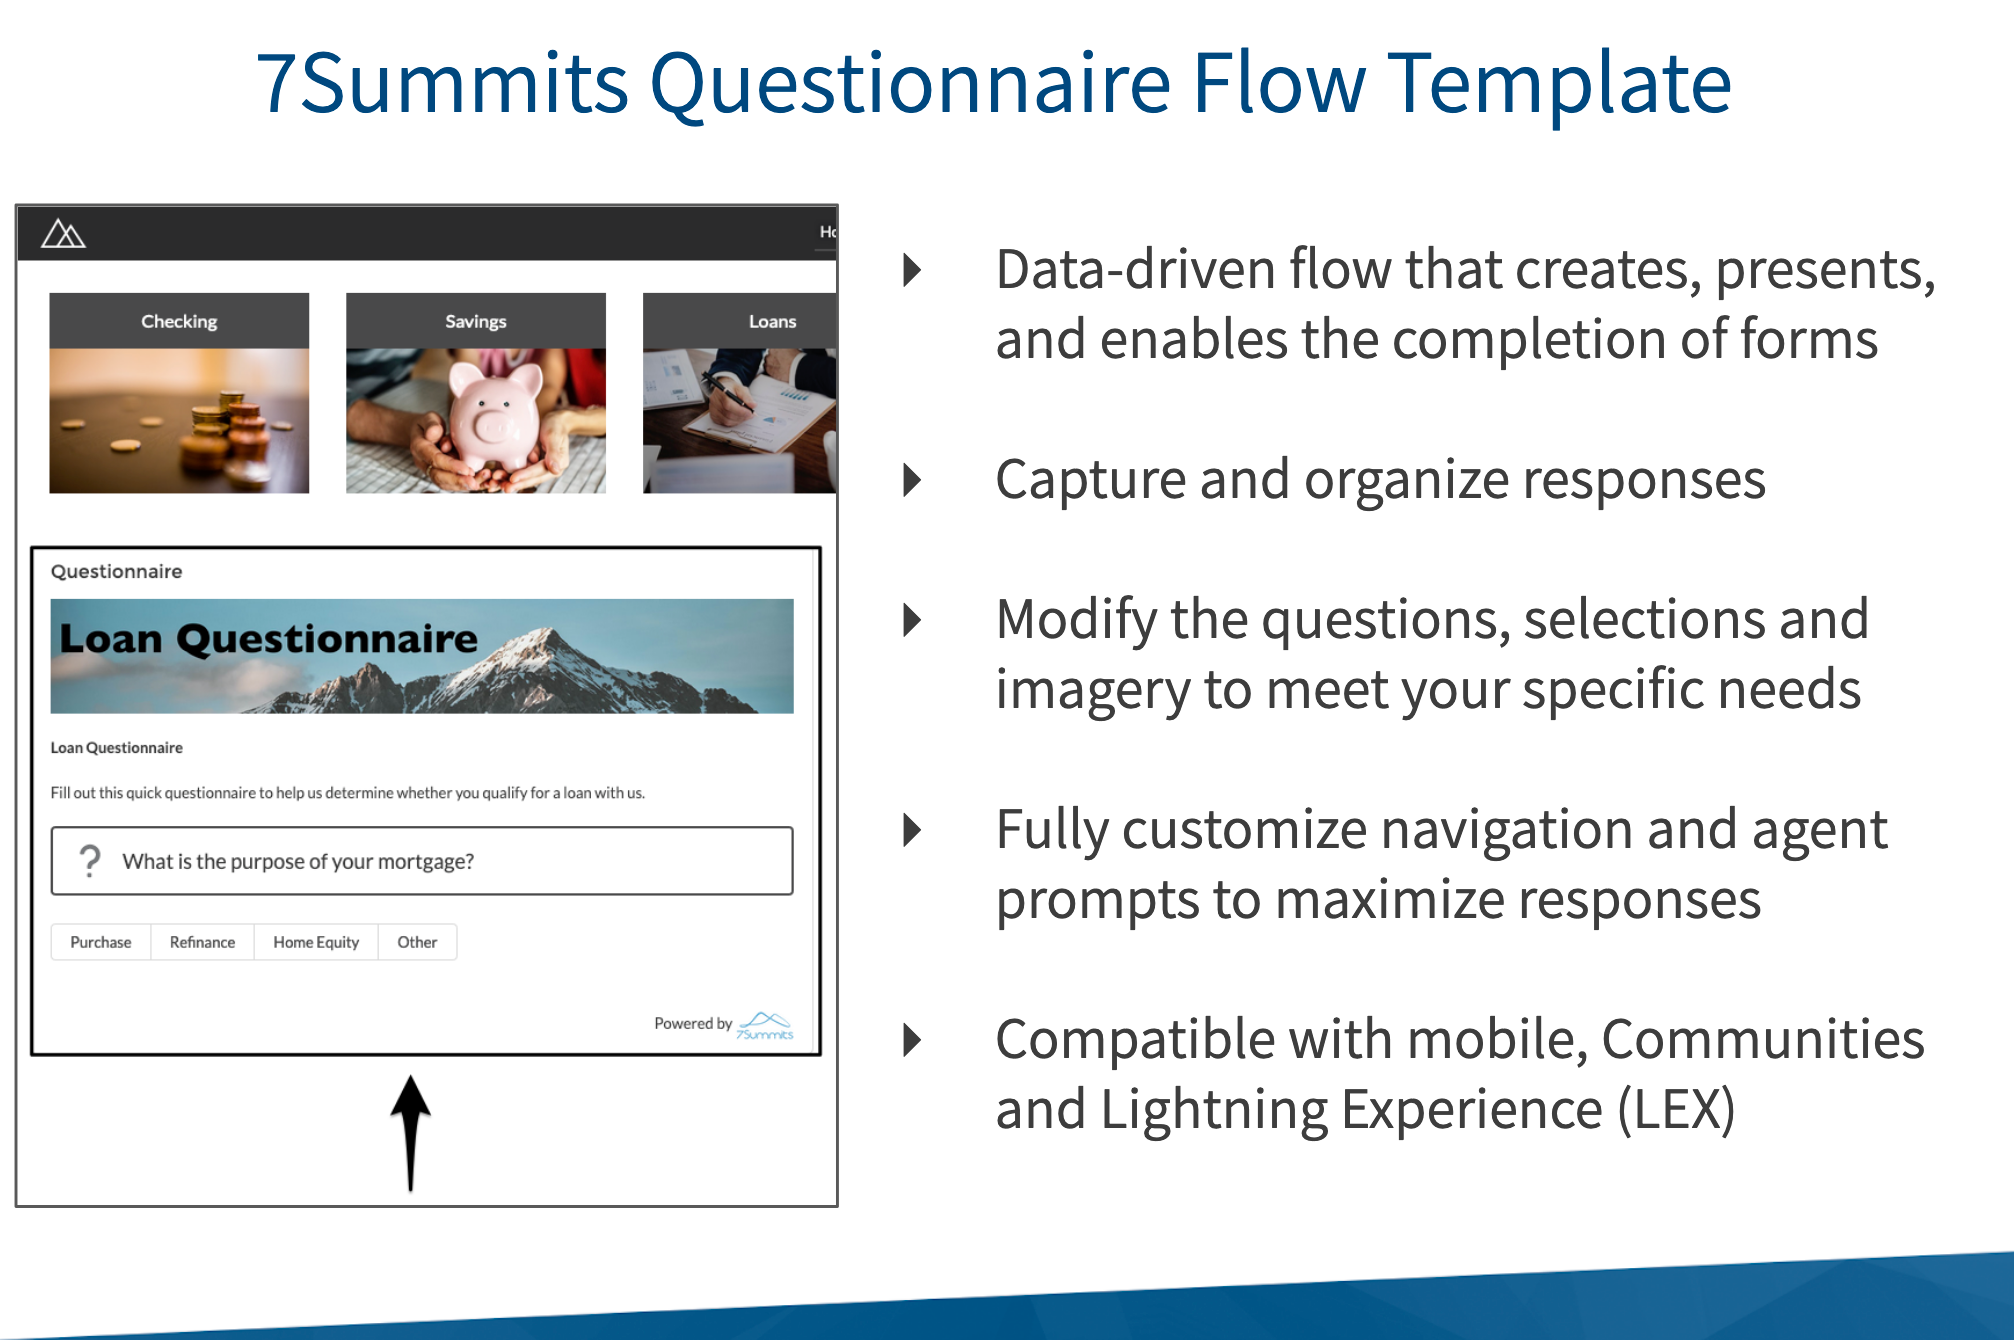 Questionnaire Form (Flow Template) - 23Summits - AppExchange Within Business Requirements Questionnaire Template